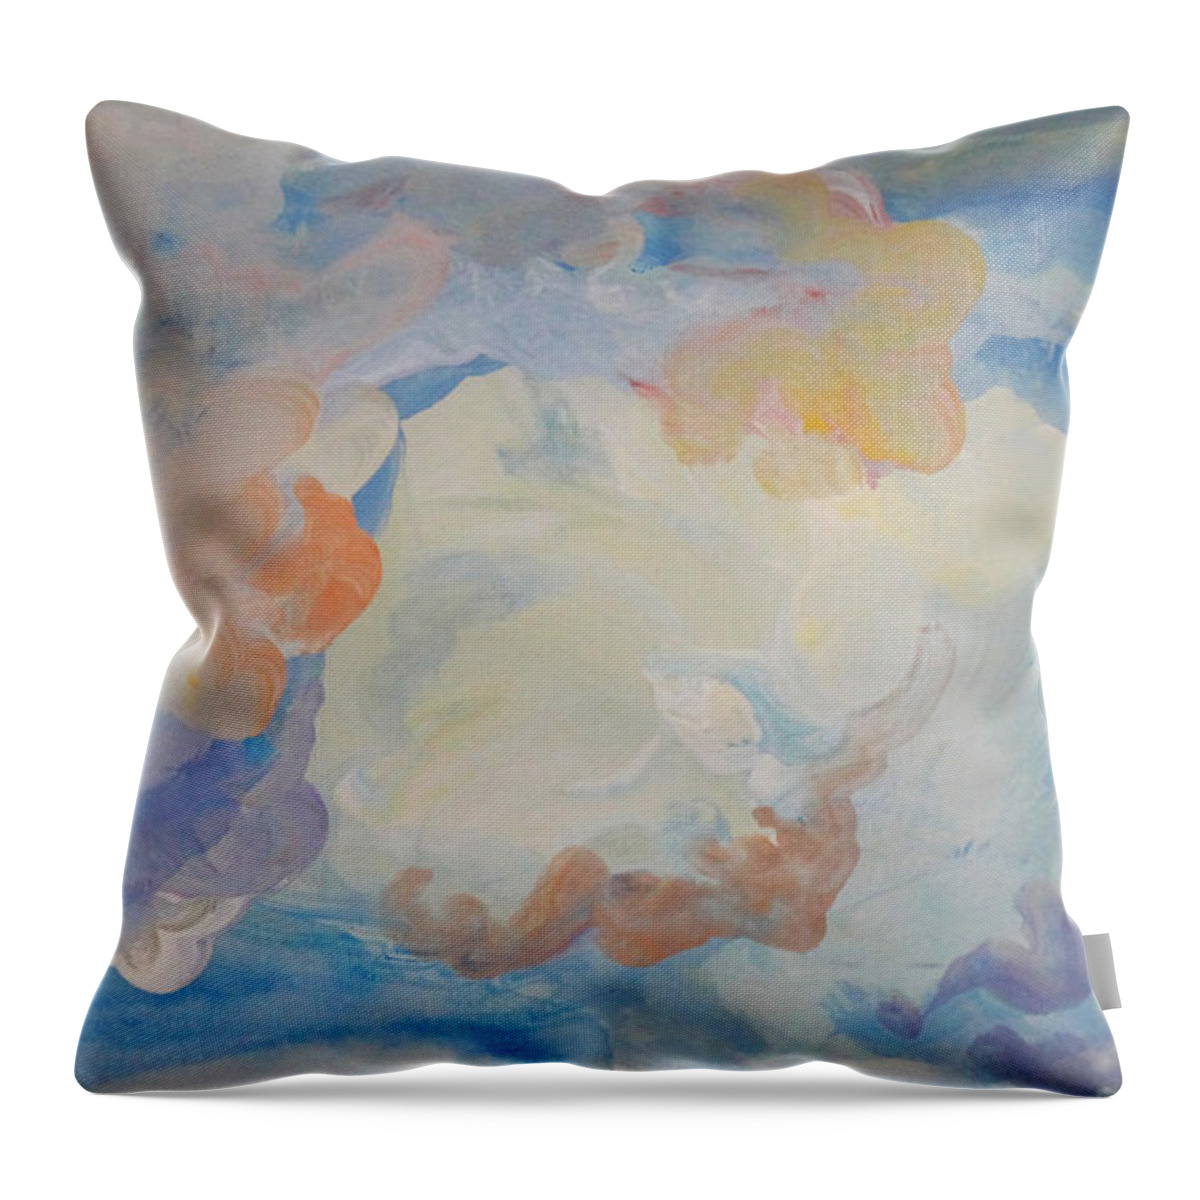 Clouds Throw Pillow featuring the painting Cloud Abstract 2 by Anne Cameron Cutri